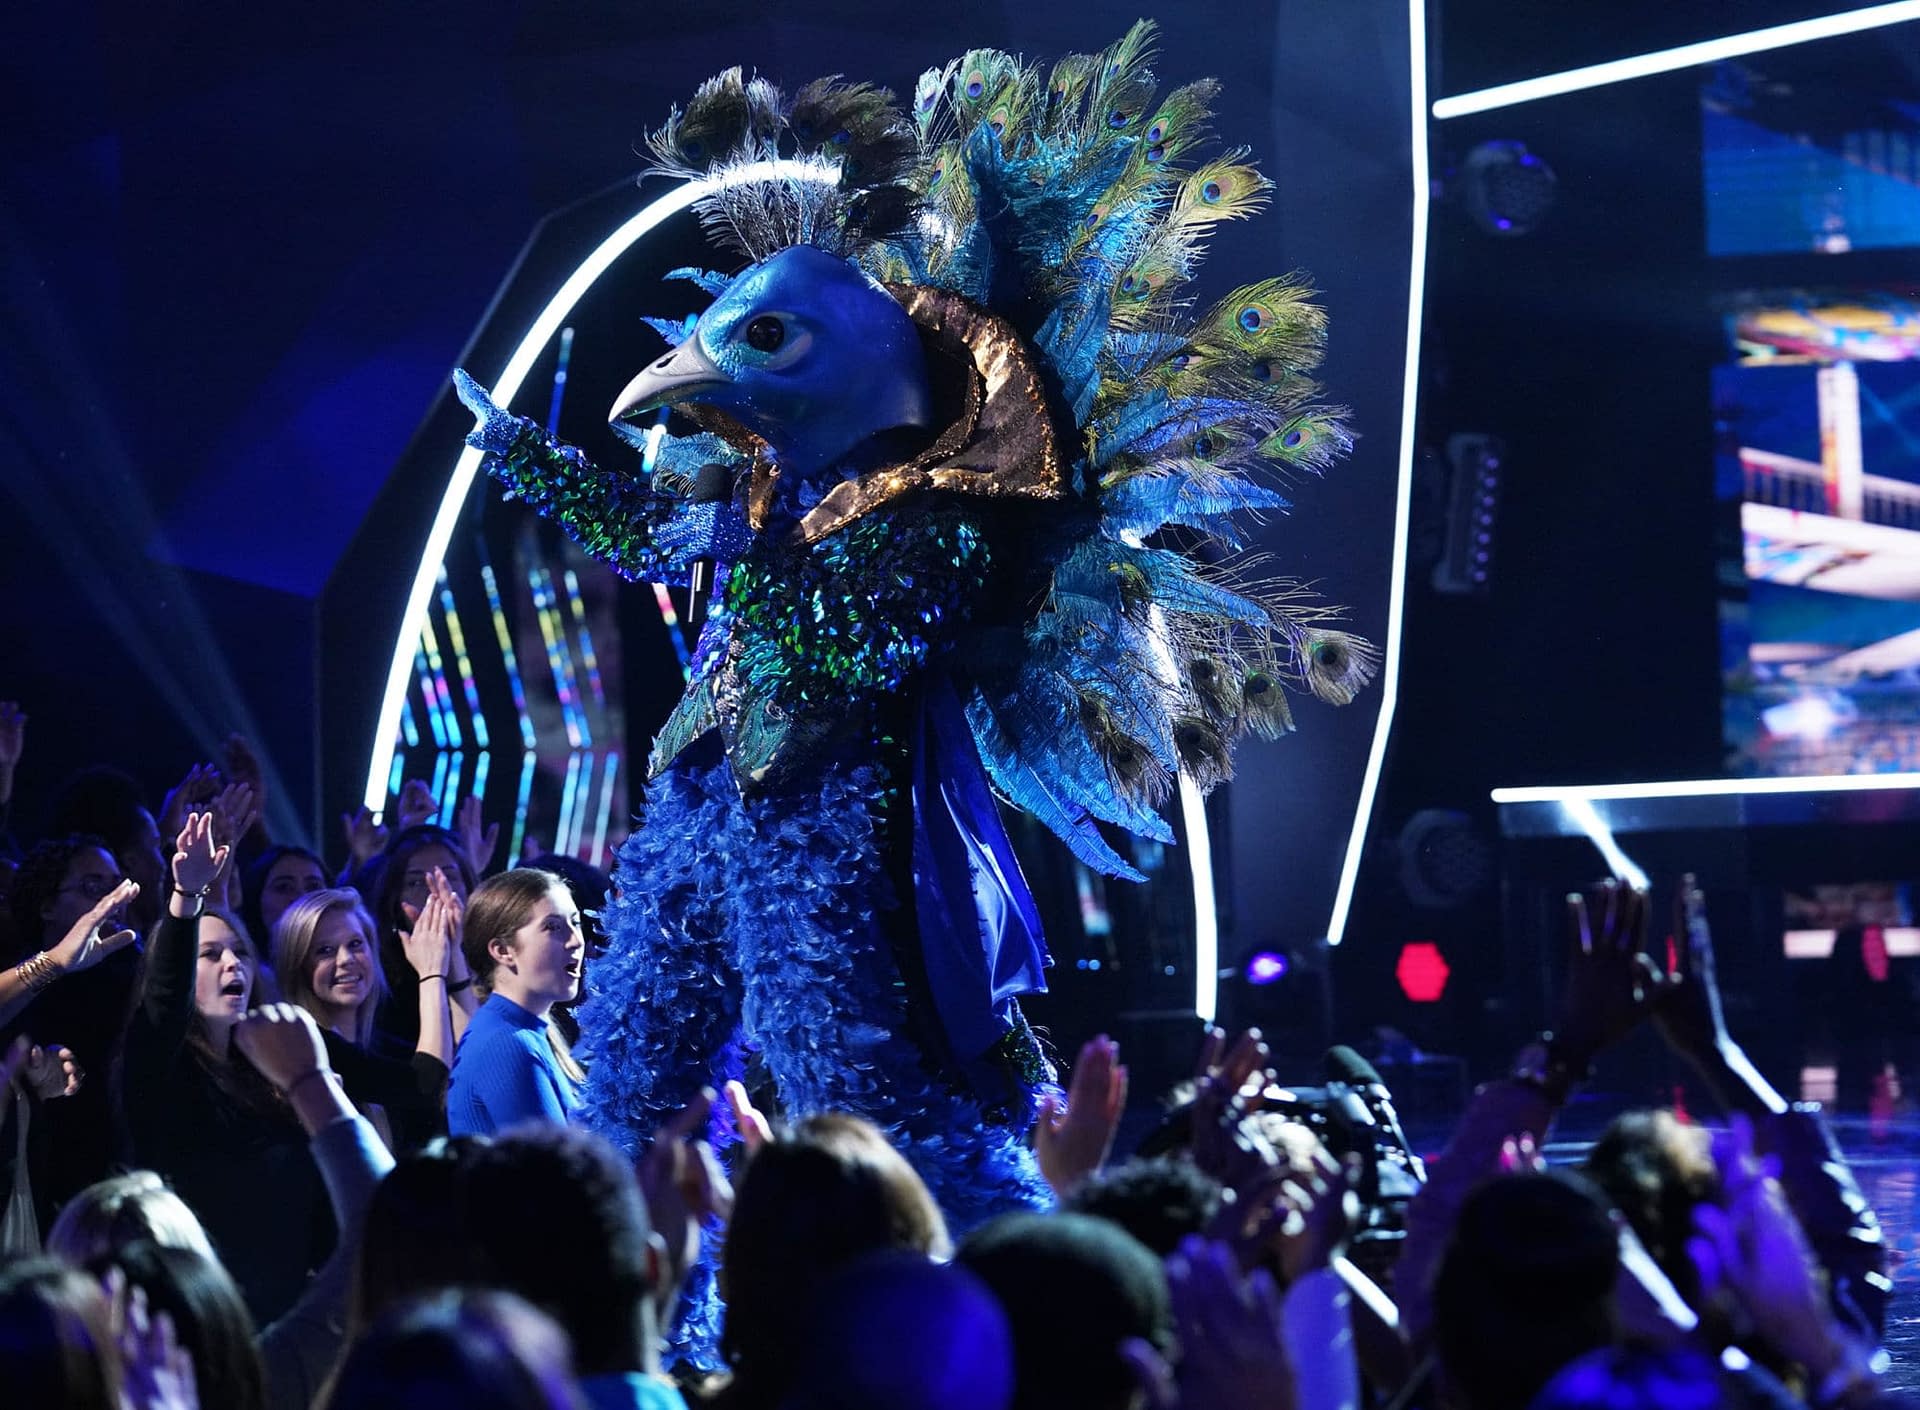 'The Masked Singer' Week 8 "Double Unmasking": You Either 'Die Hard' or Go 'Bye, Bye, Bye!' [SPOILER REVIEW]